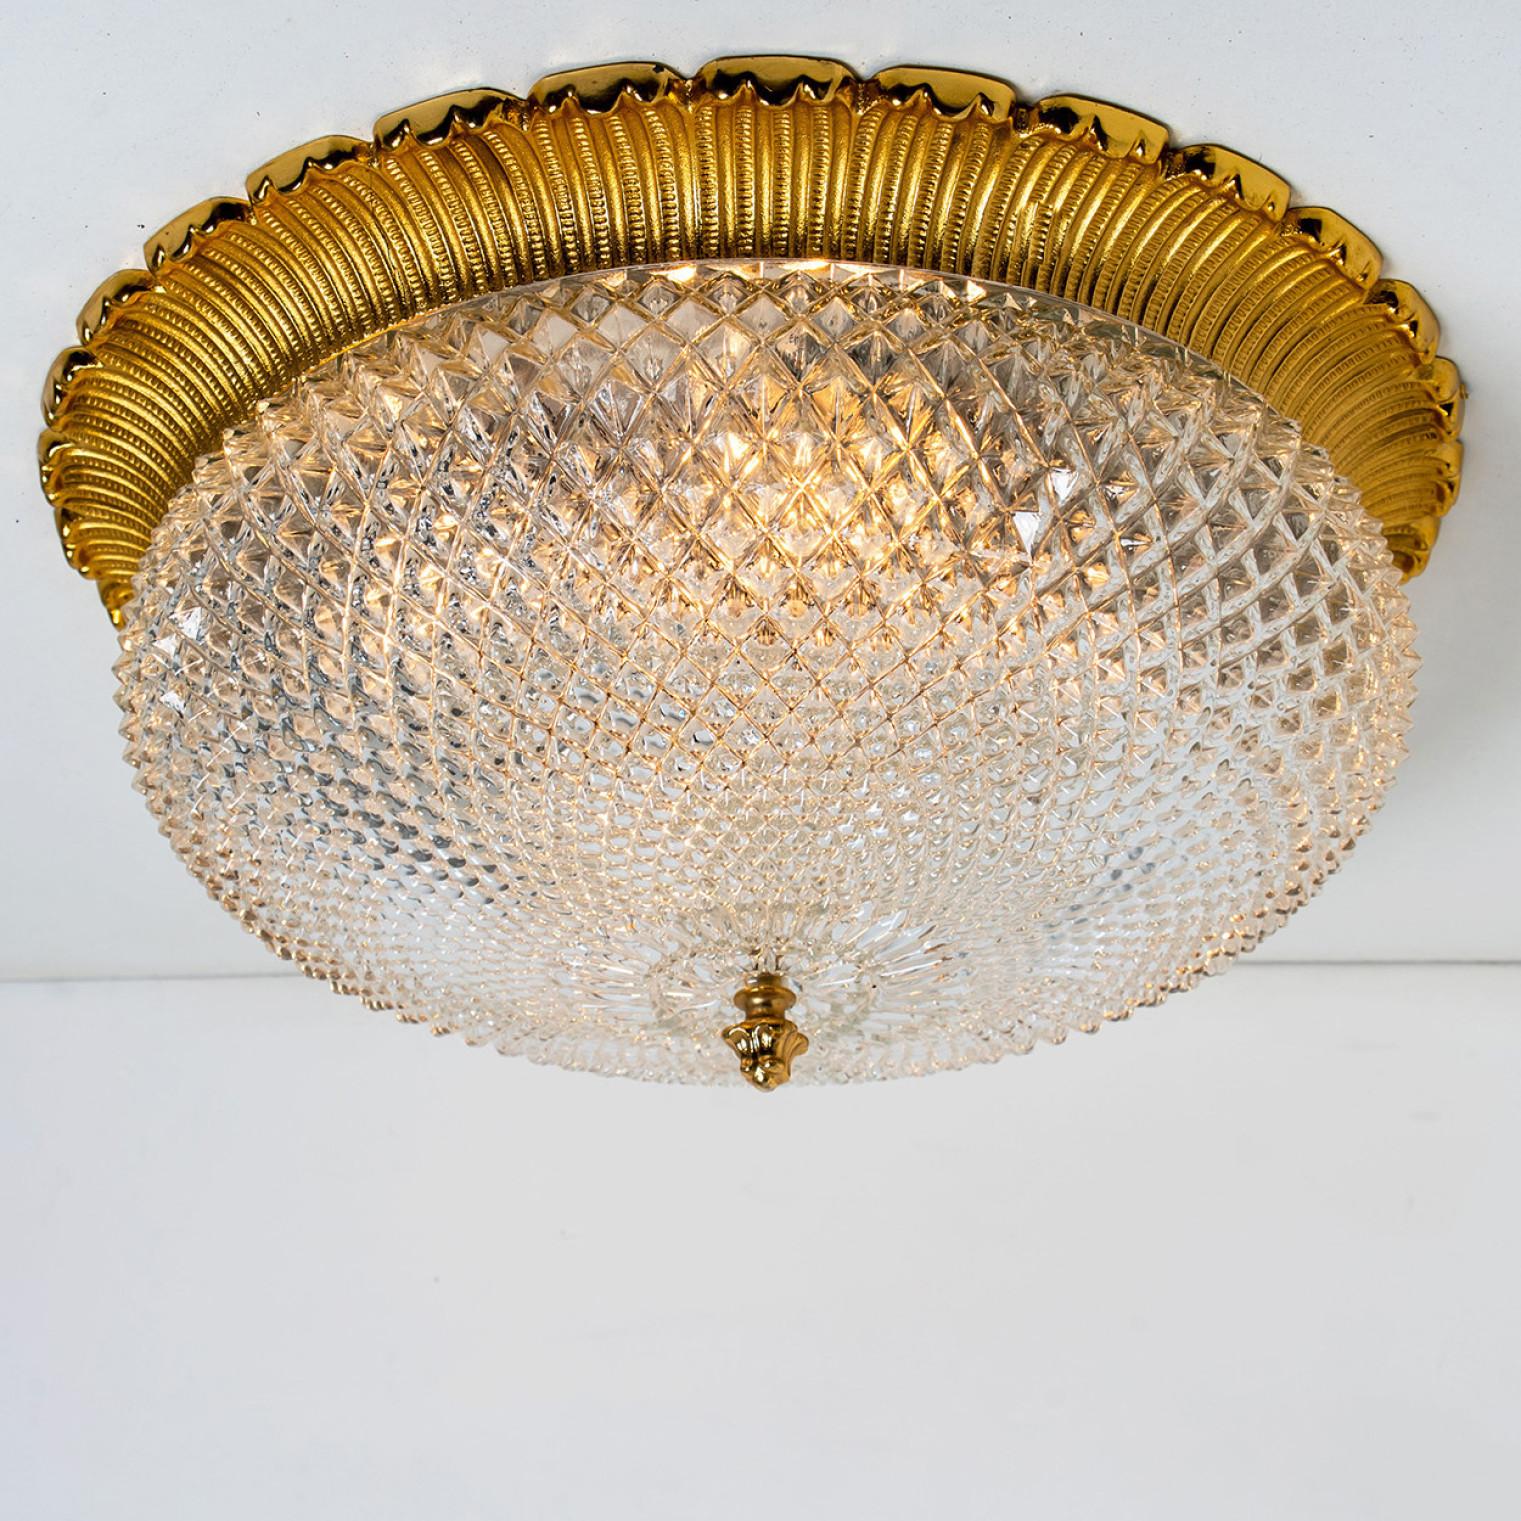 A large glass flush mount by Glashutte Limburg in Germany, 1960s. High-end pieces. Thick textured glass fixture on a brass base.

Measurement: Ø 19.7